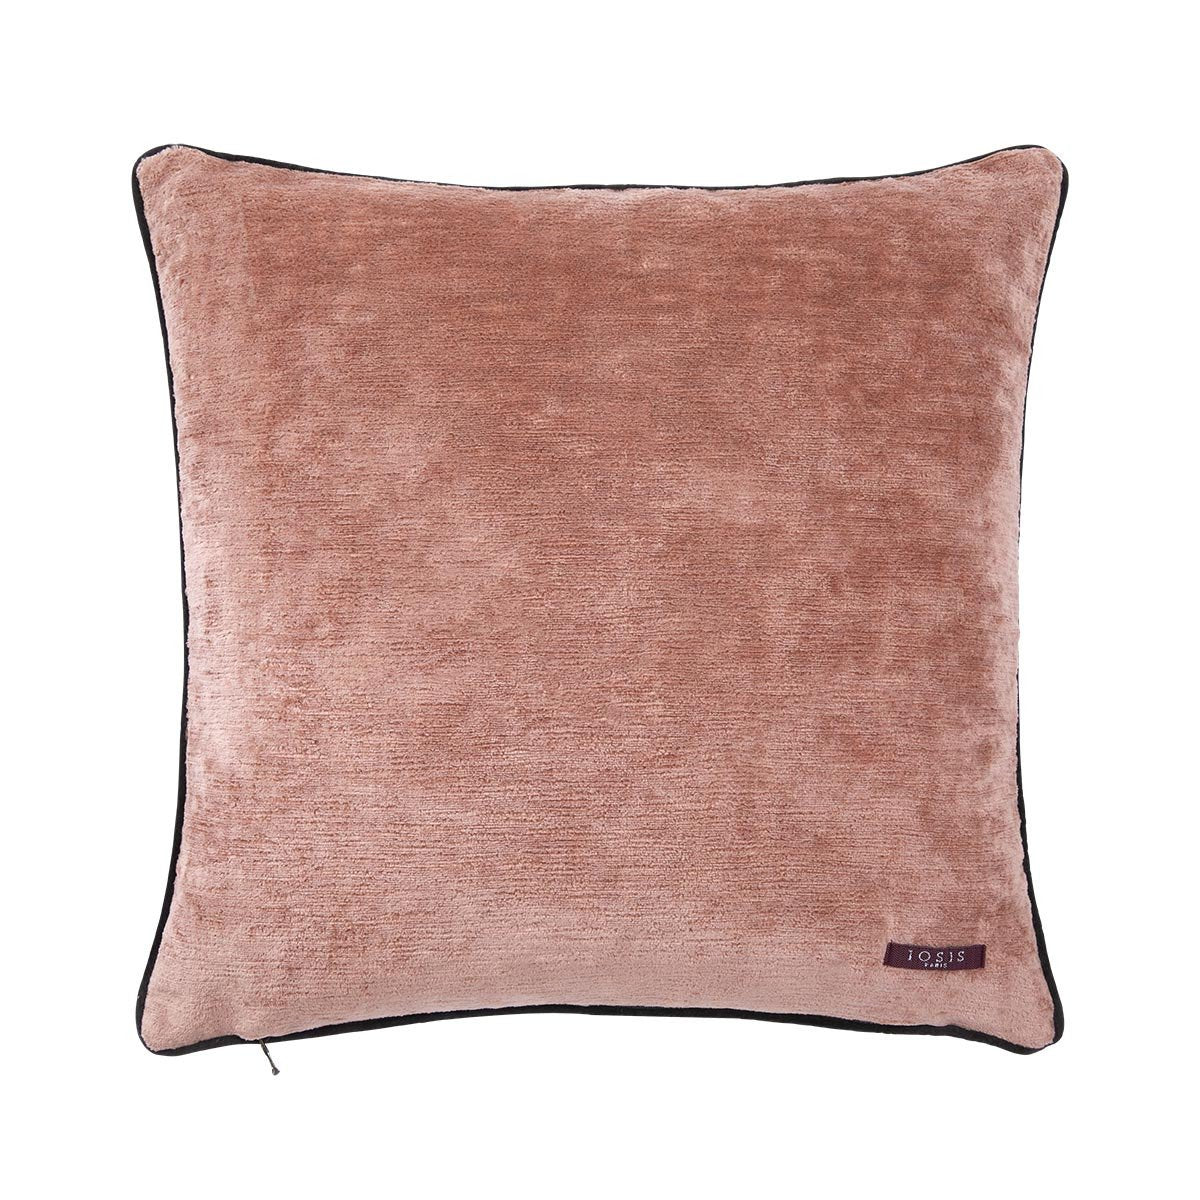 Fig Linens - Boromee Cedre Pink Decorative Pillow by Iosis